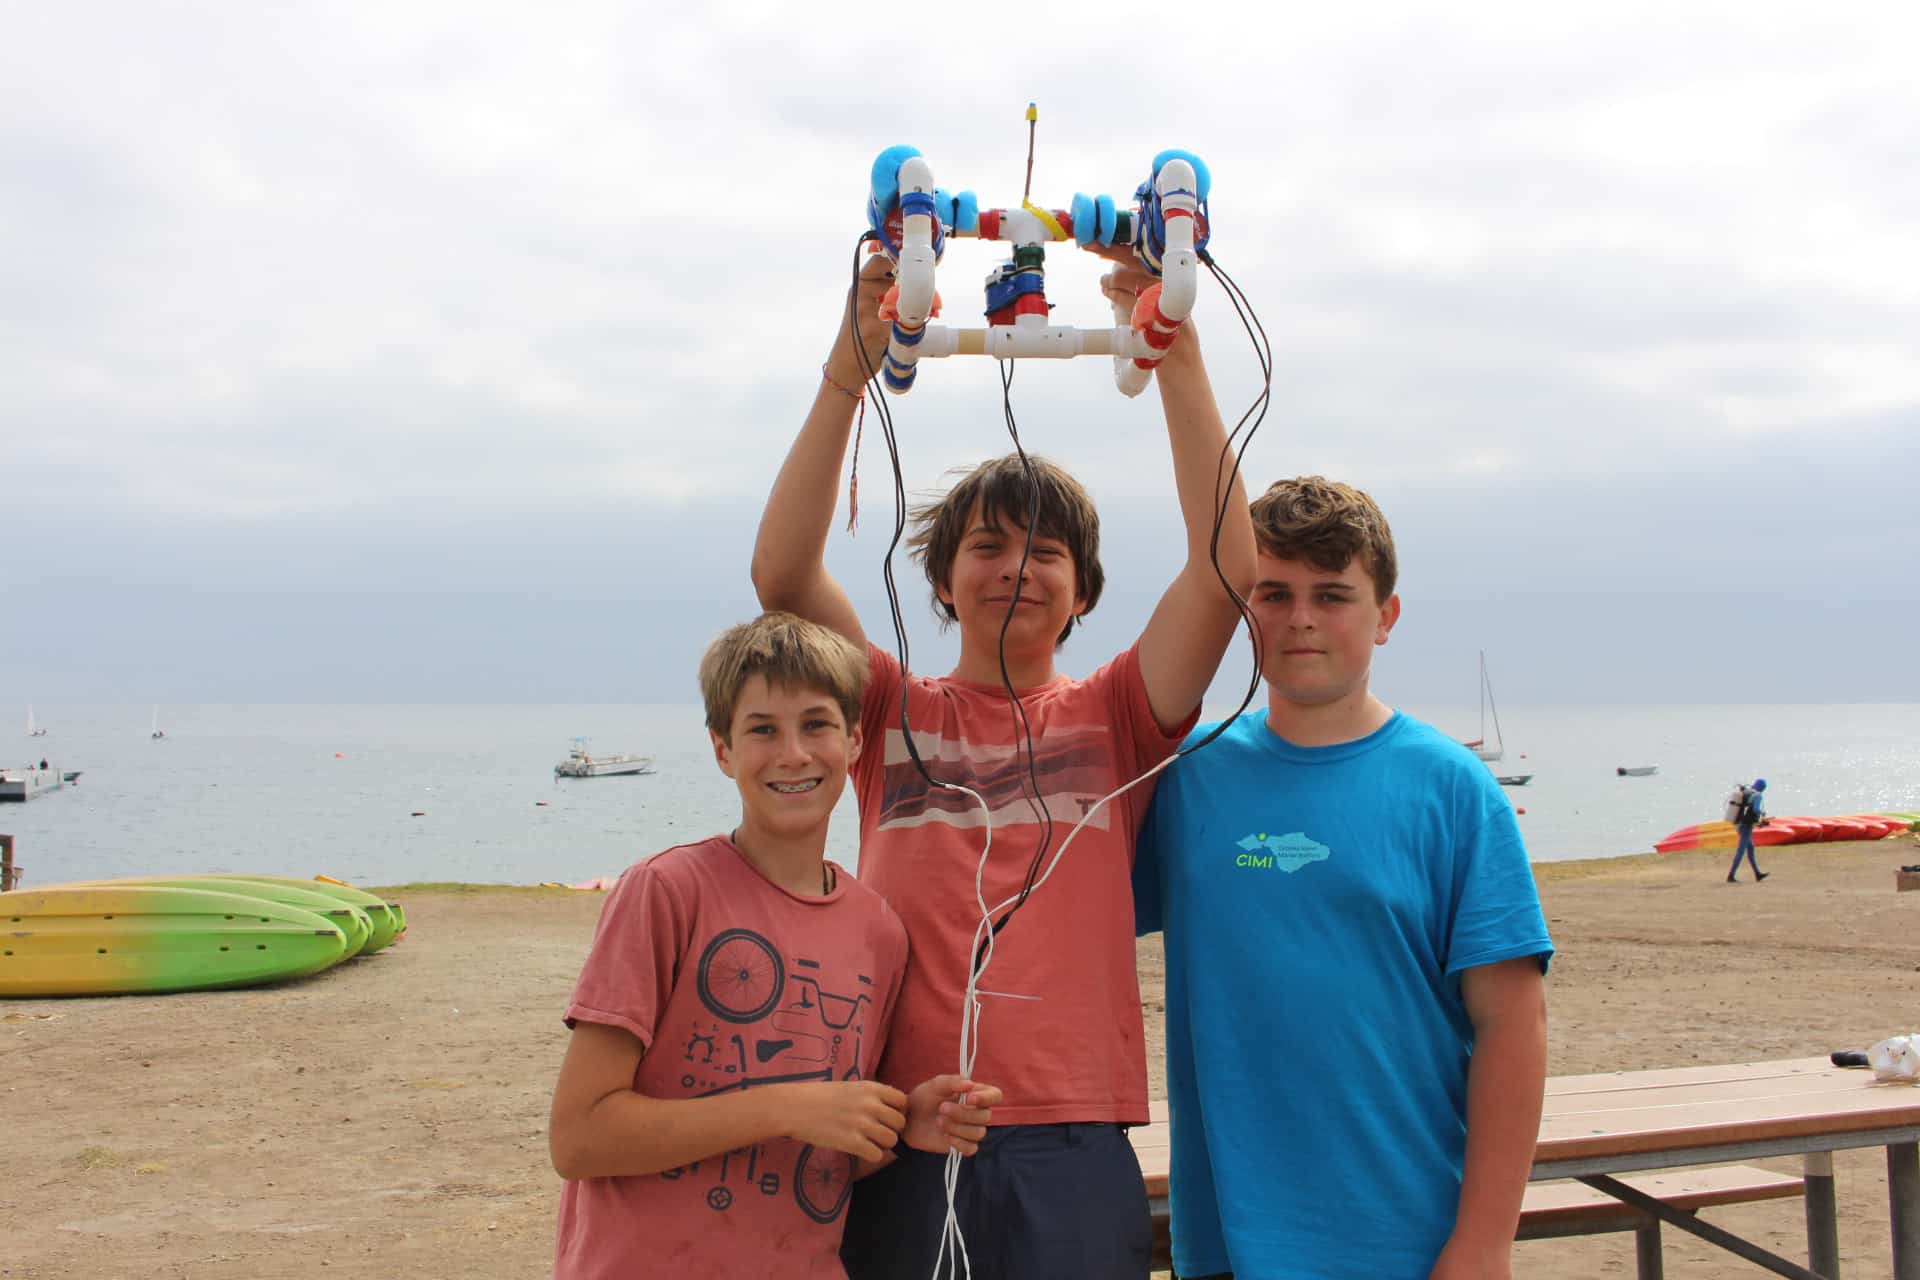 Three campers at a beach with a ROV.